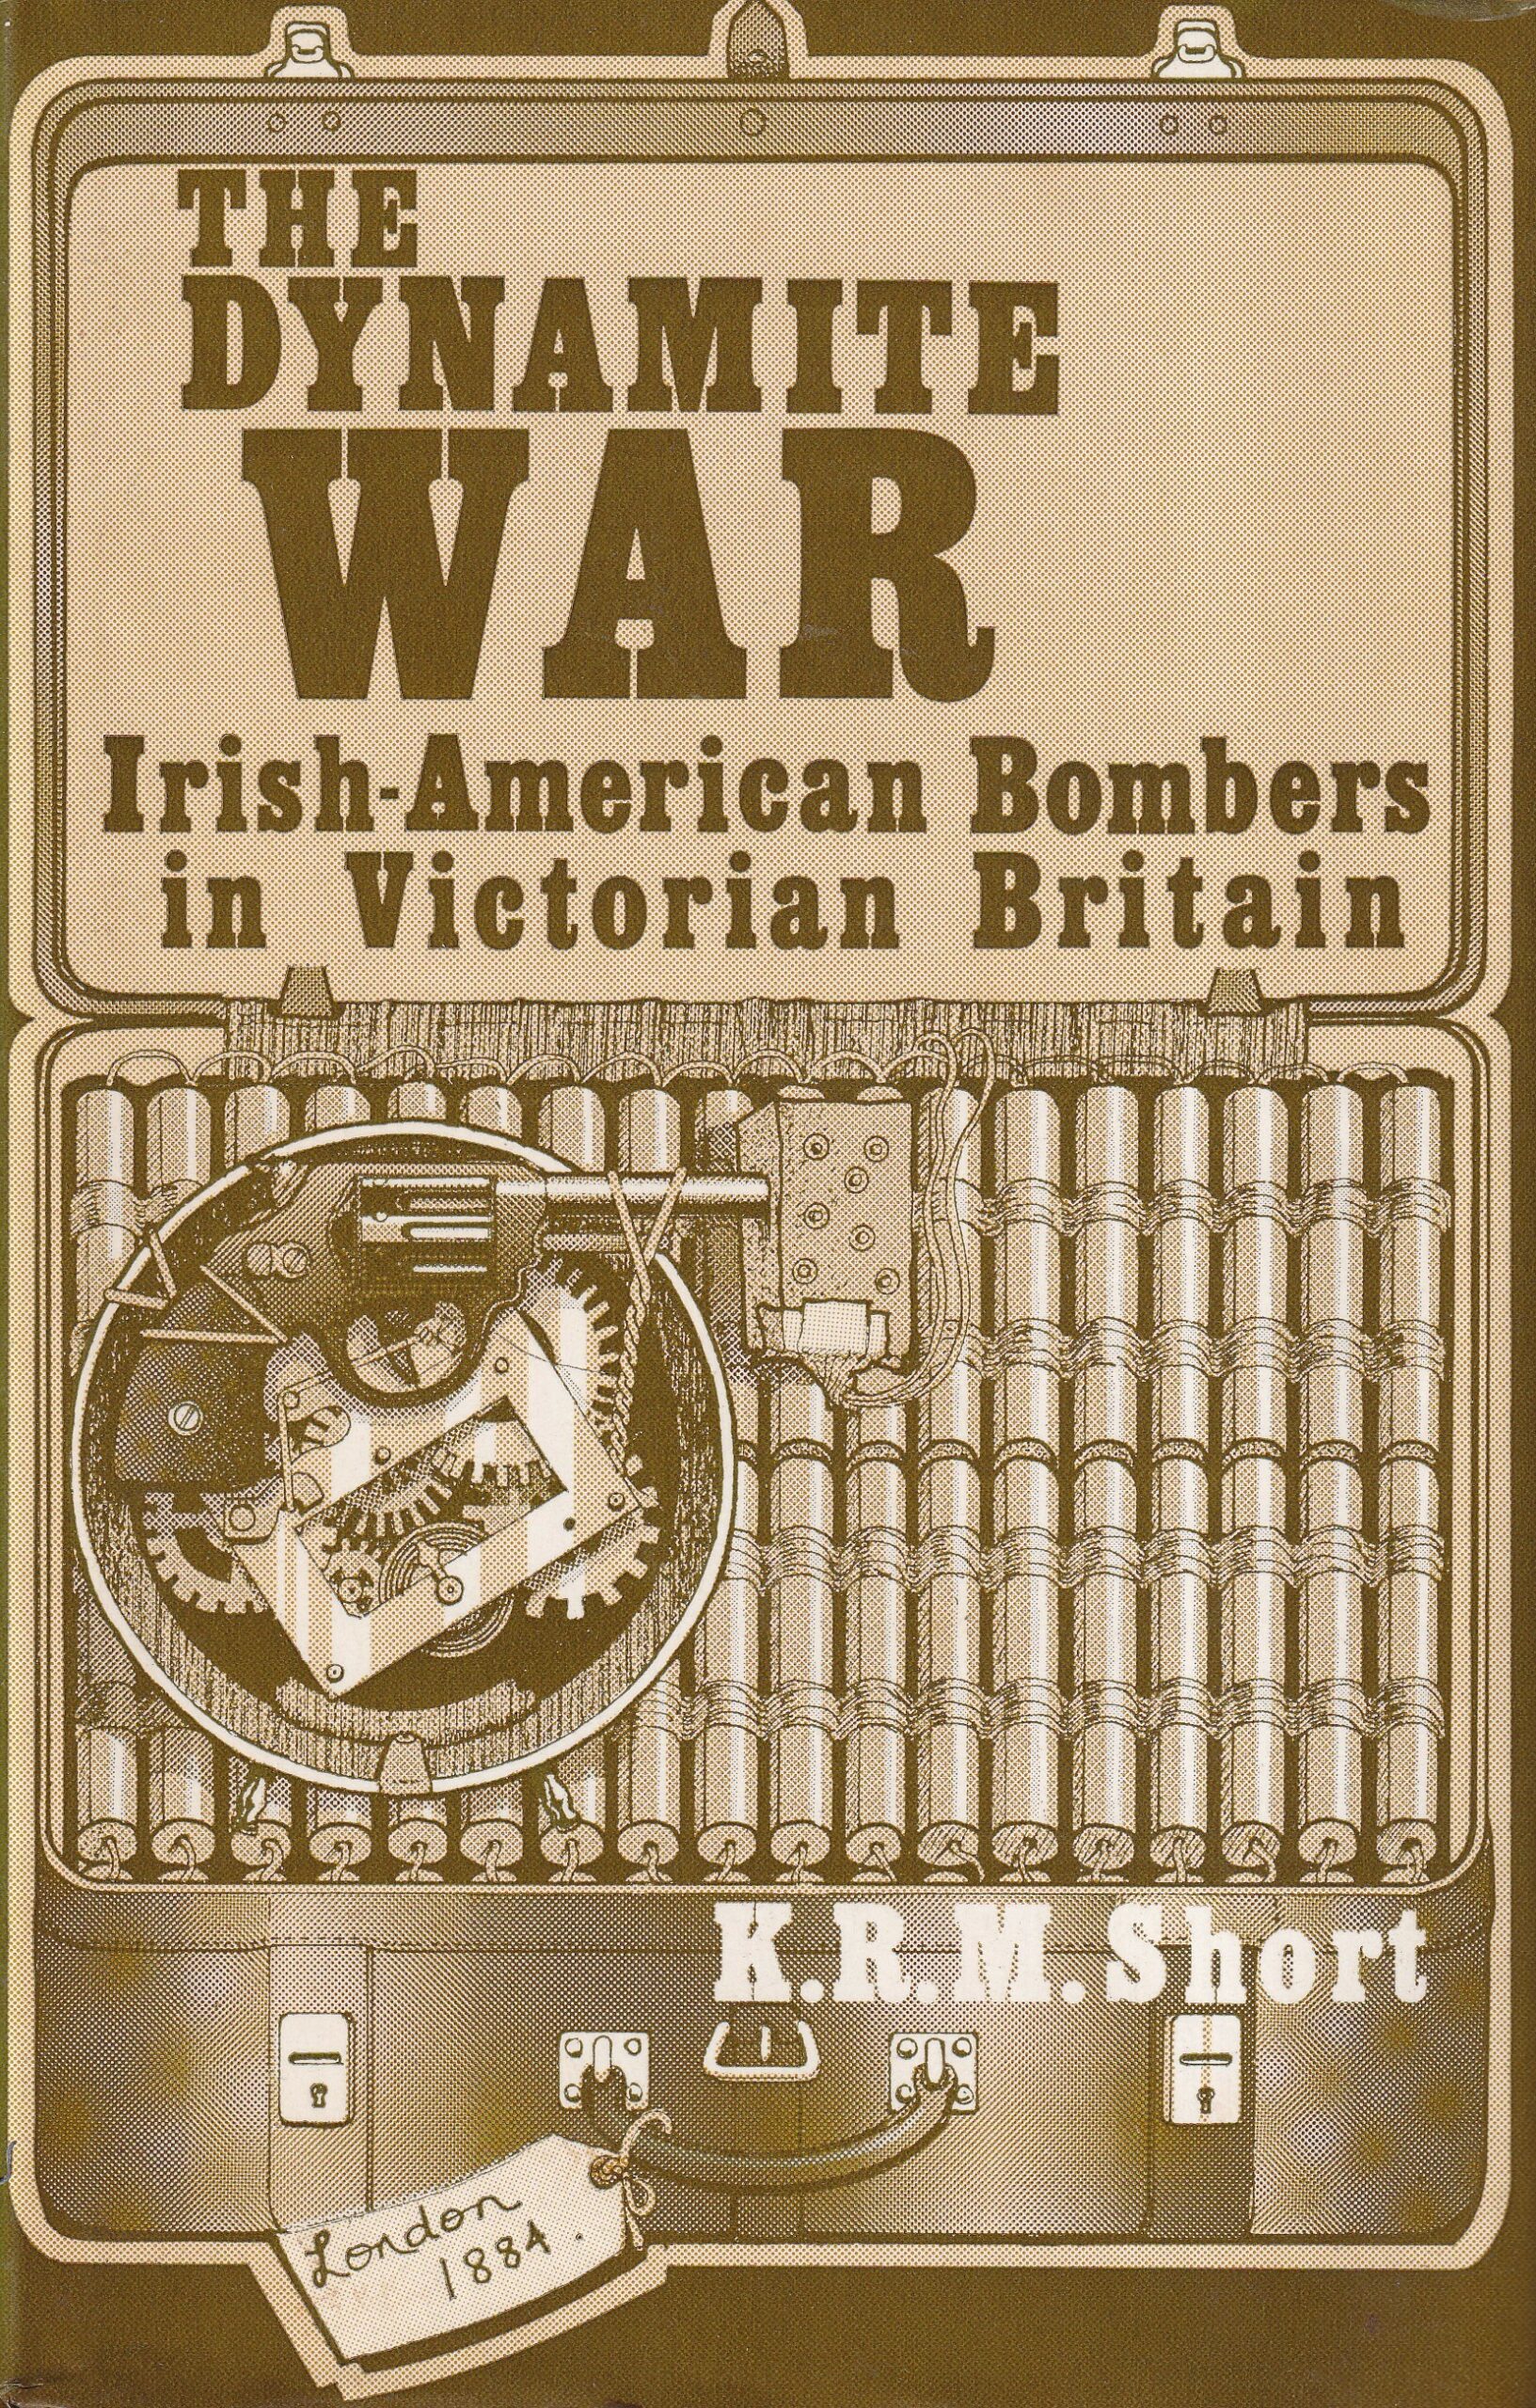 The Dynamite War: Irish-American Bombers in Victorian Britain by K.R.M. Short